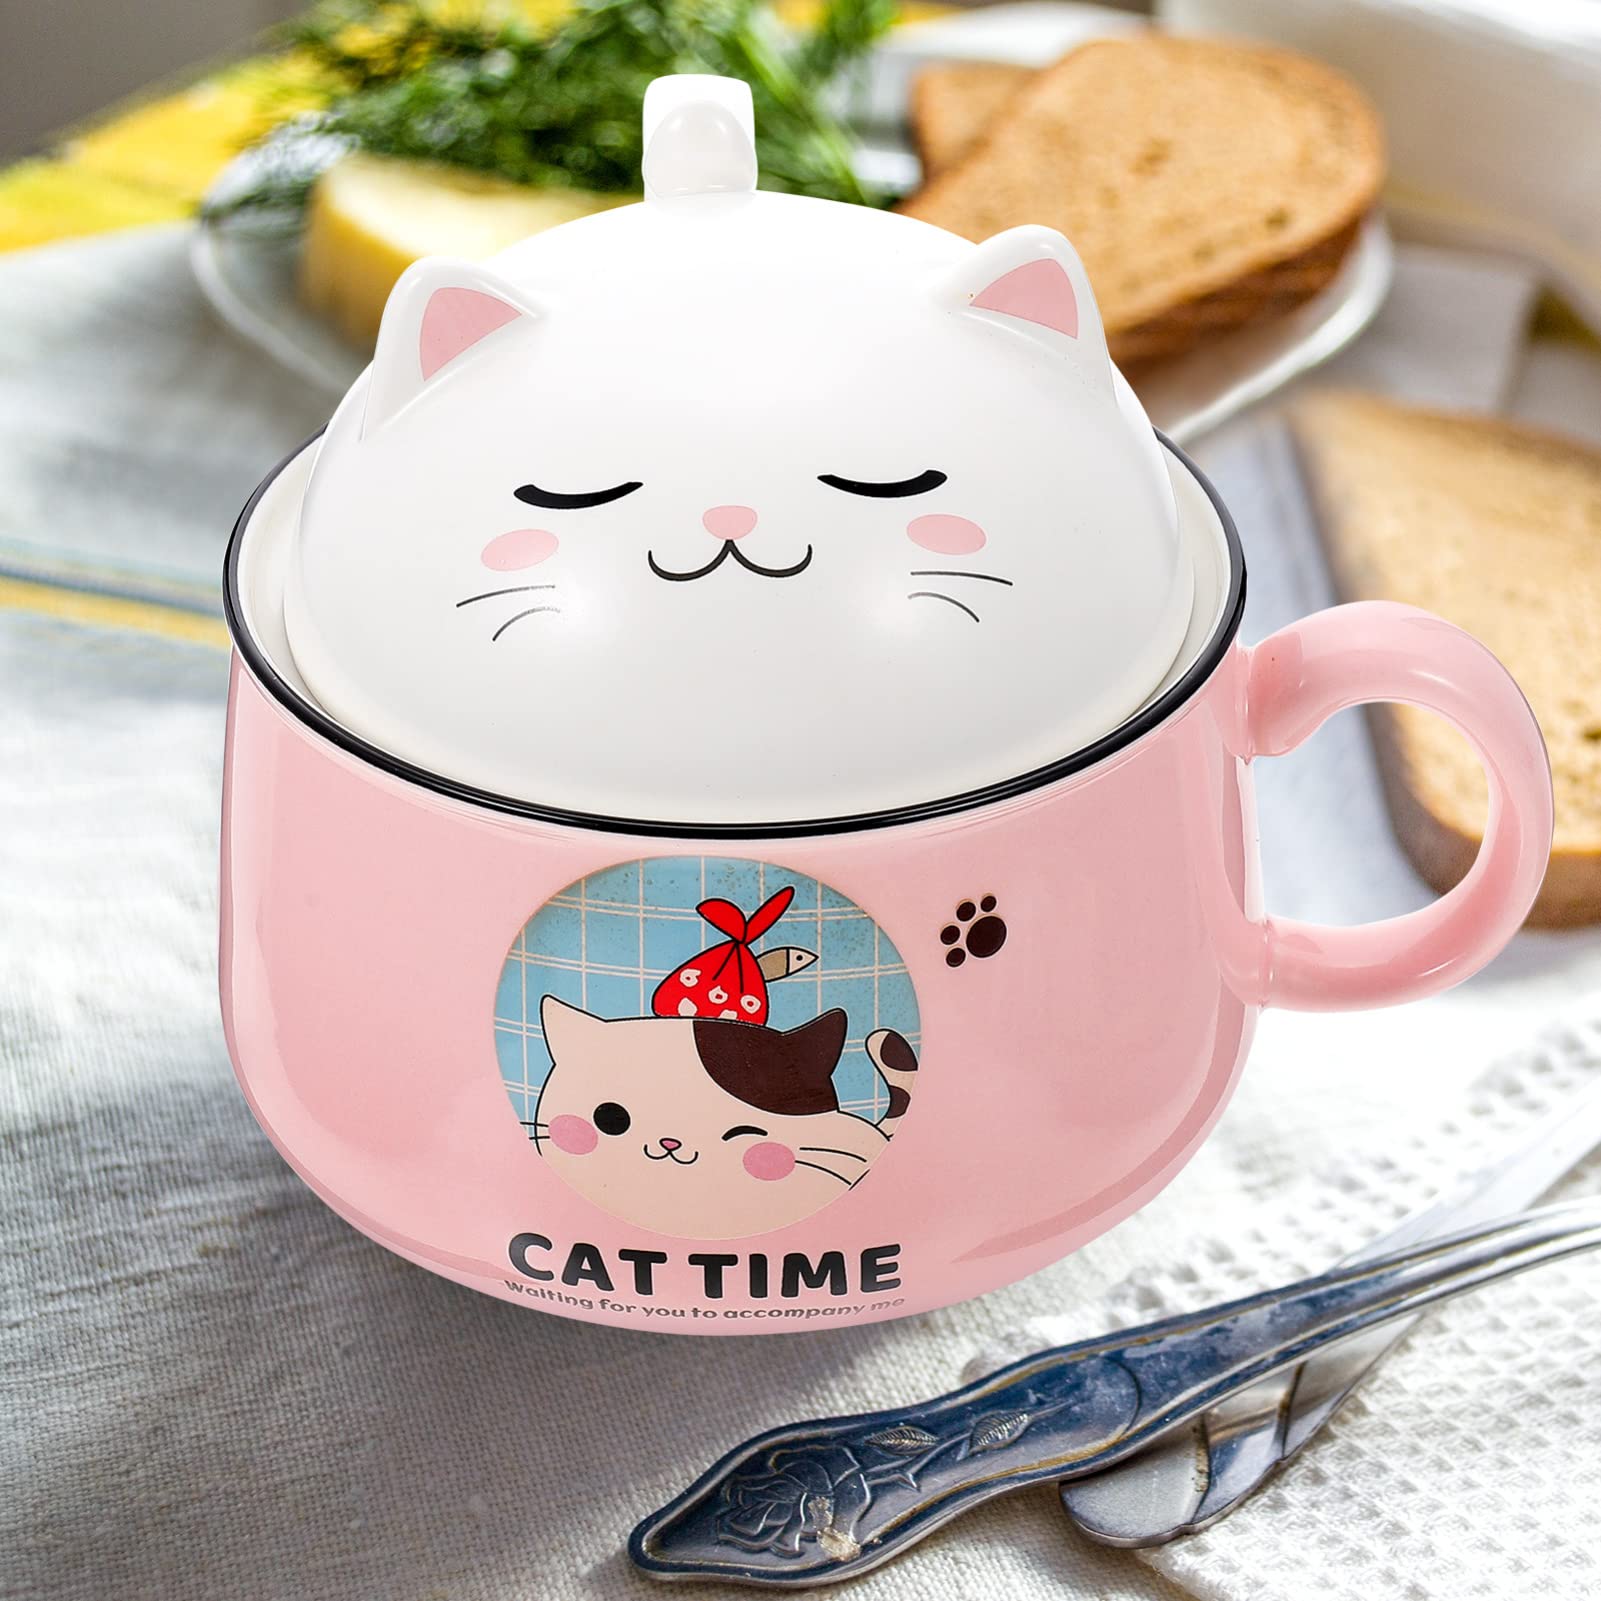 Angoily Chinese Decor Ceramic Bowl with Lid Handle Cat Design Instant Noodle Bowl Cereal Bowl Soup Mug Ramen Bowl for Rice Salad Noodle Pho Vegetable Fruit 1020ml Pasta Container